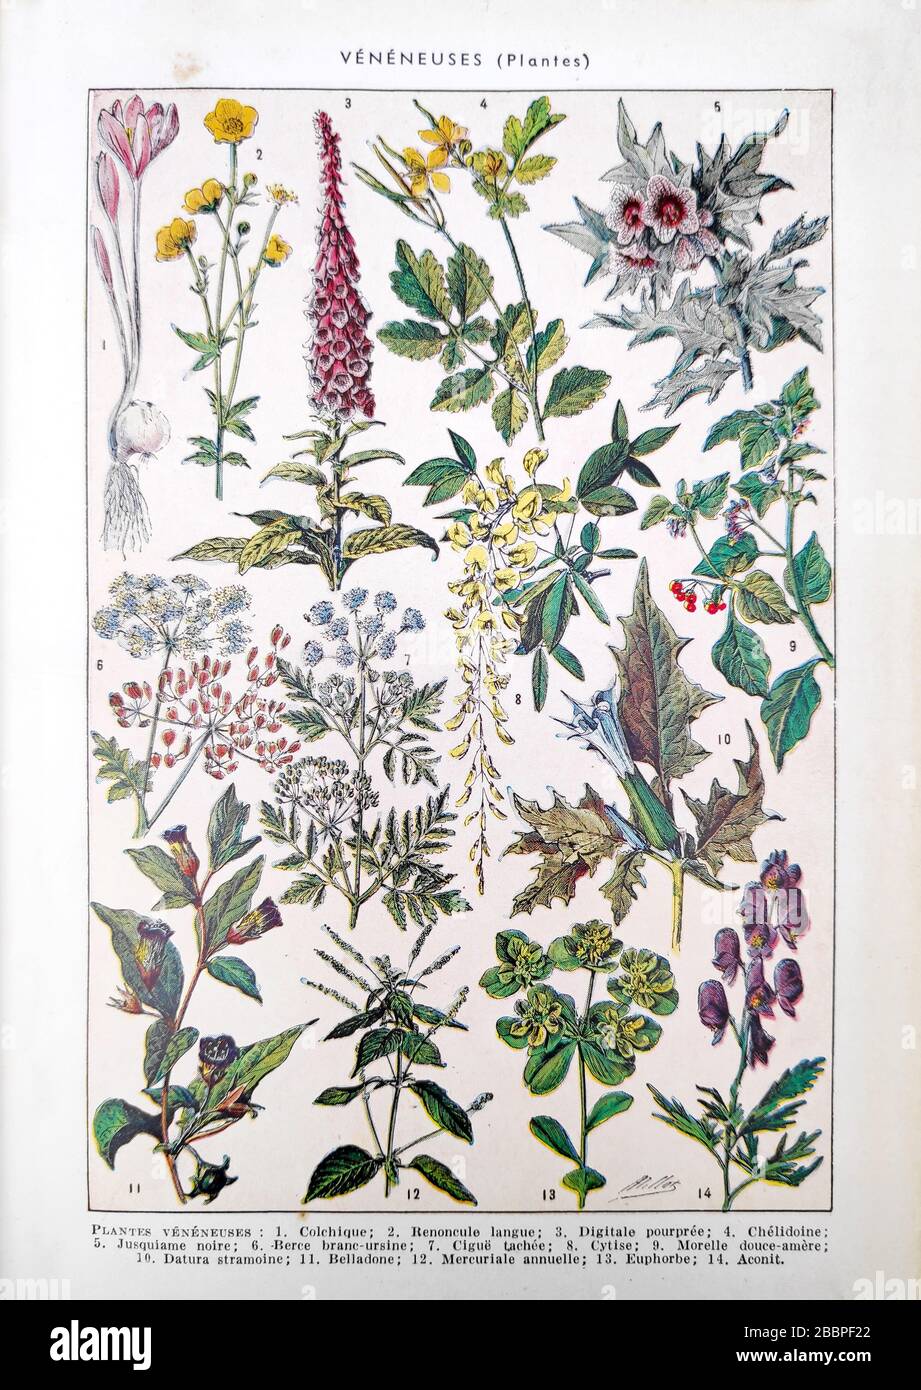 Old illustration about poisonous plants by Adolphe Philippe Millot printed in the late 19th century. Stock Photo